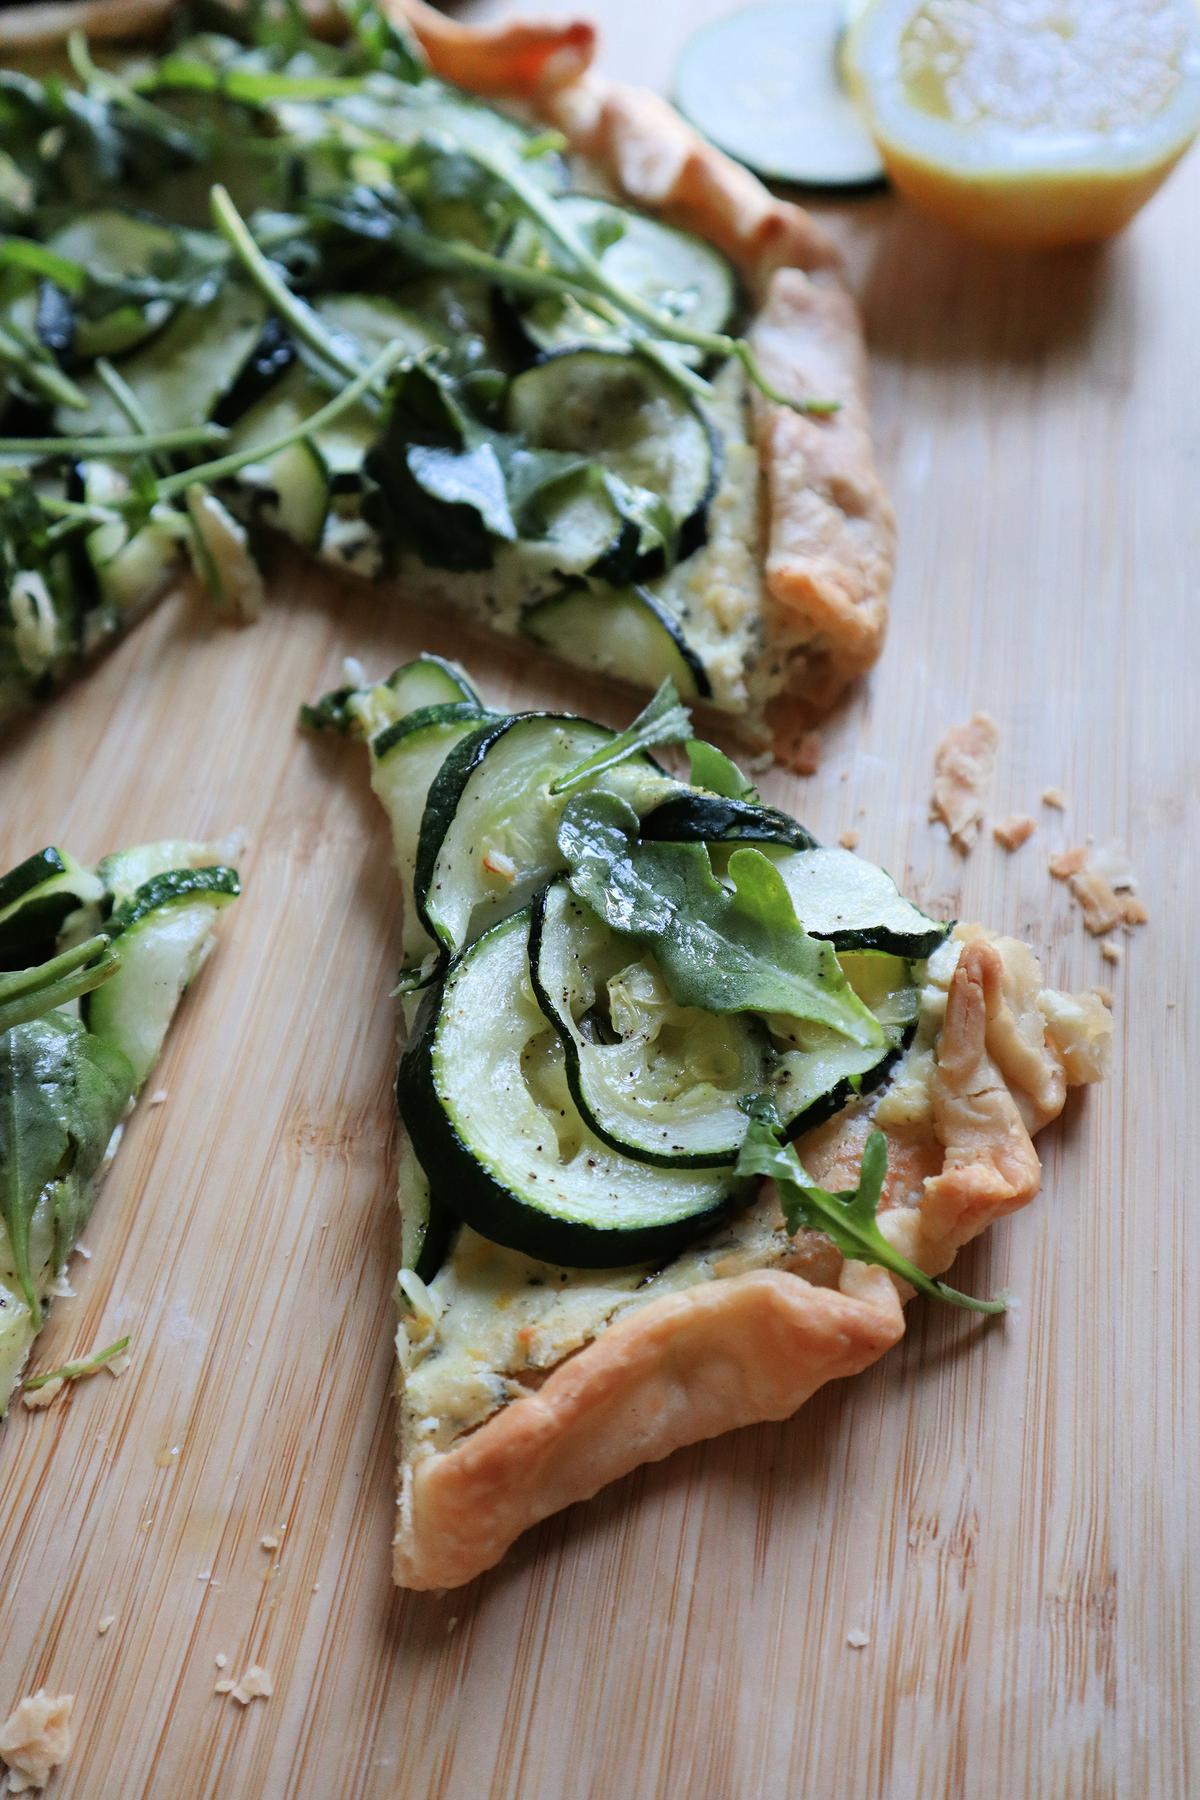 Topped with thin rounds of zucchini and creamy Boursin cheese, this summer tart takes just minutes to prepare. (Gretchen McKay/Pittsburgh Post-Gazette/TNS)